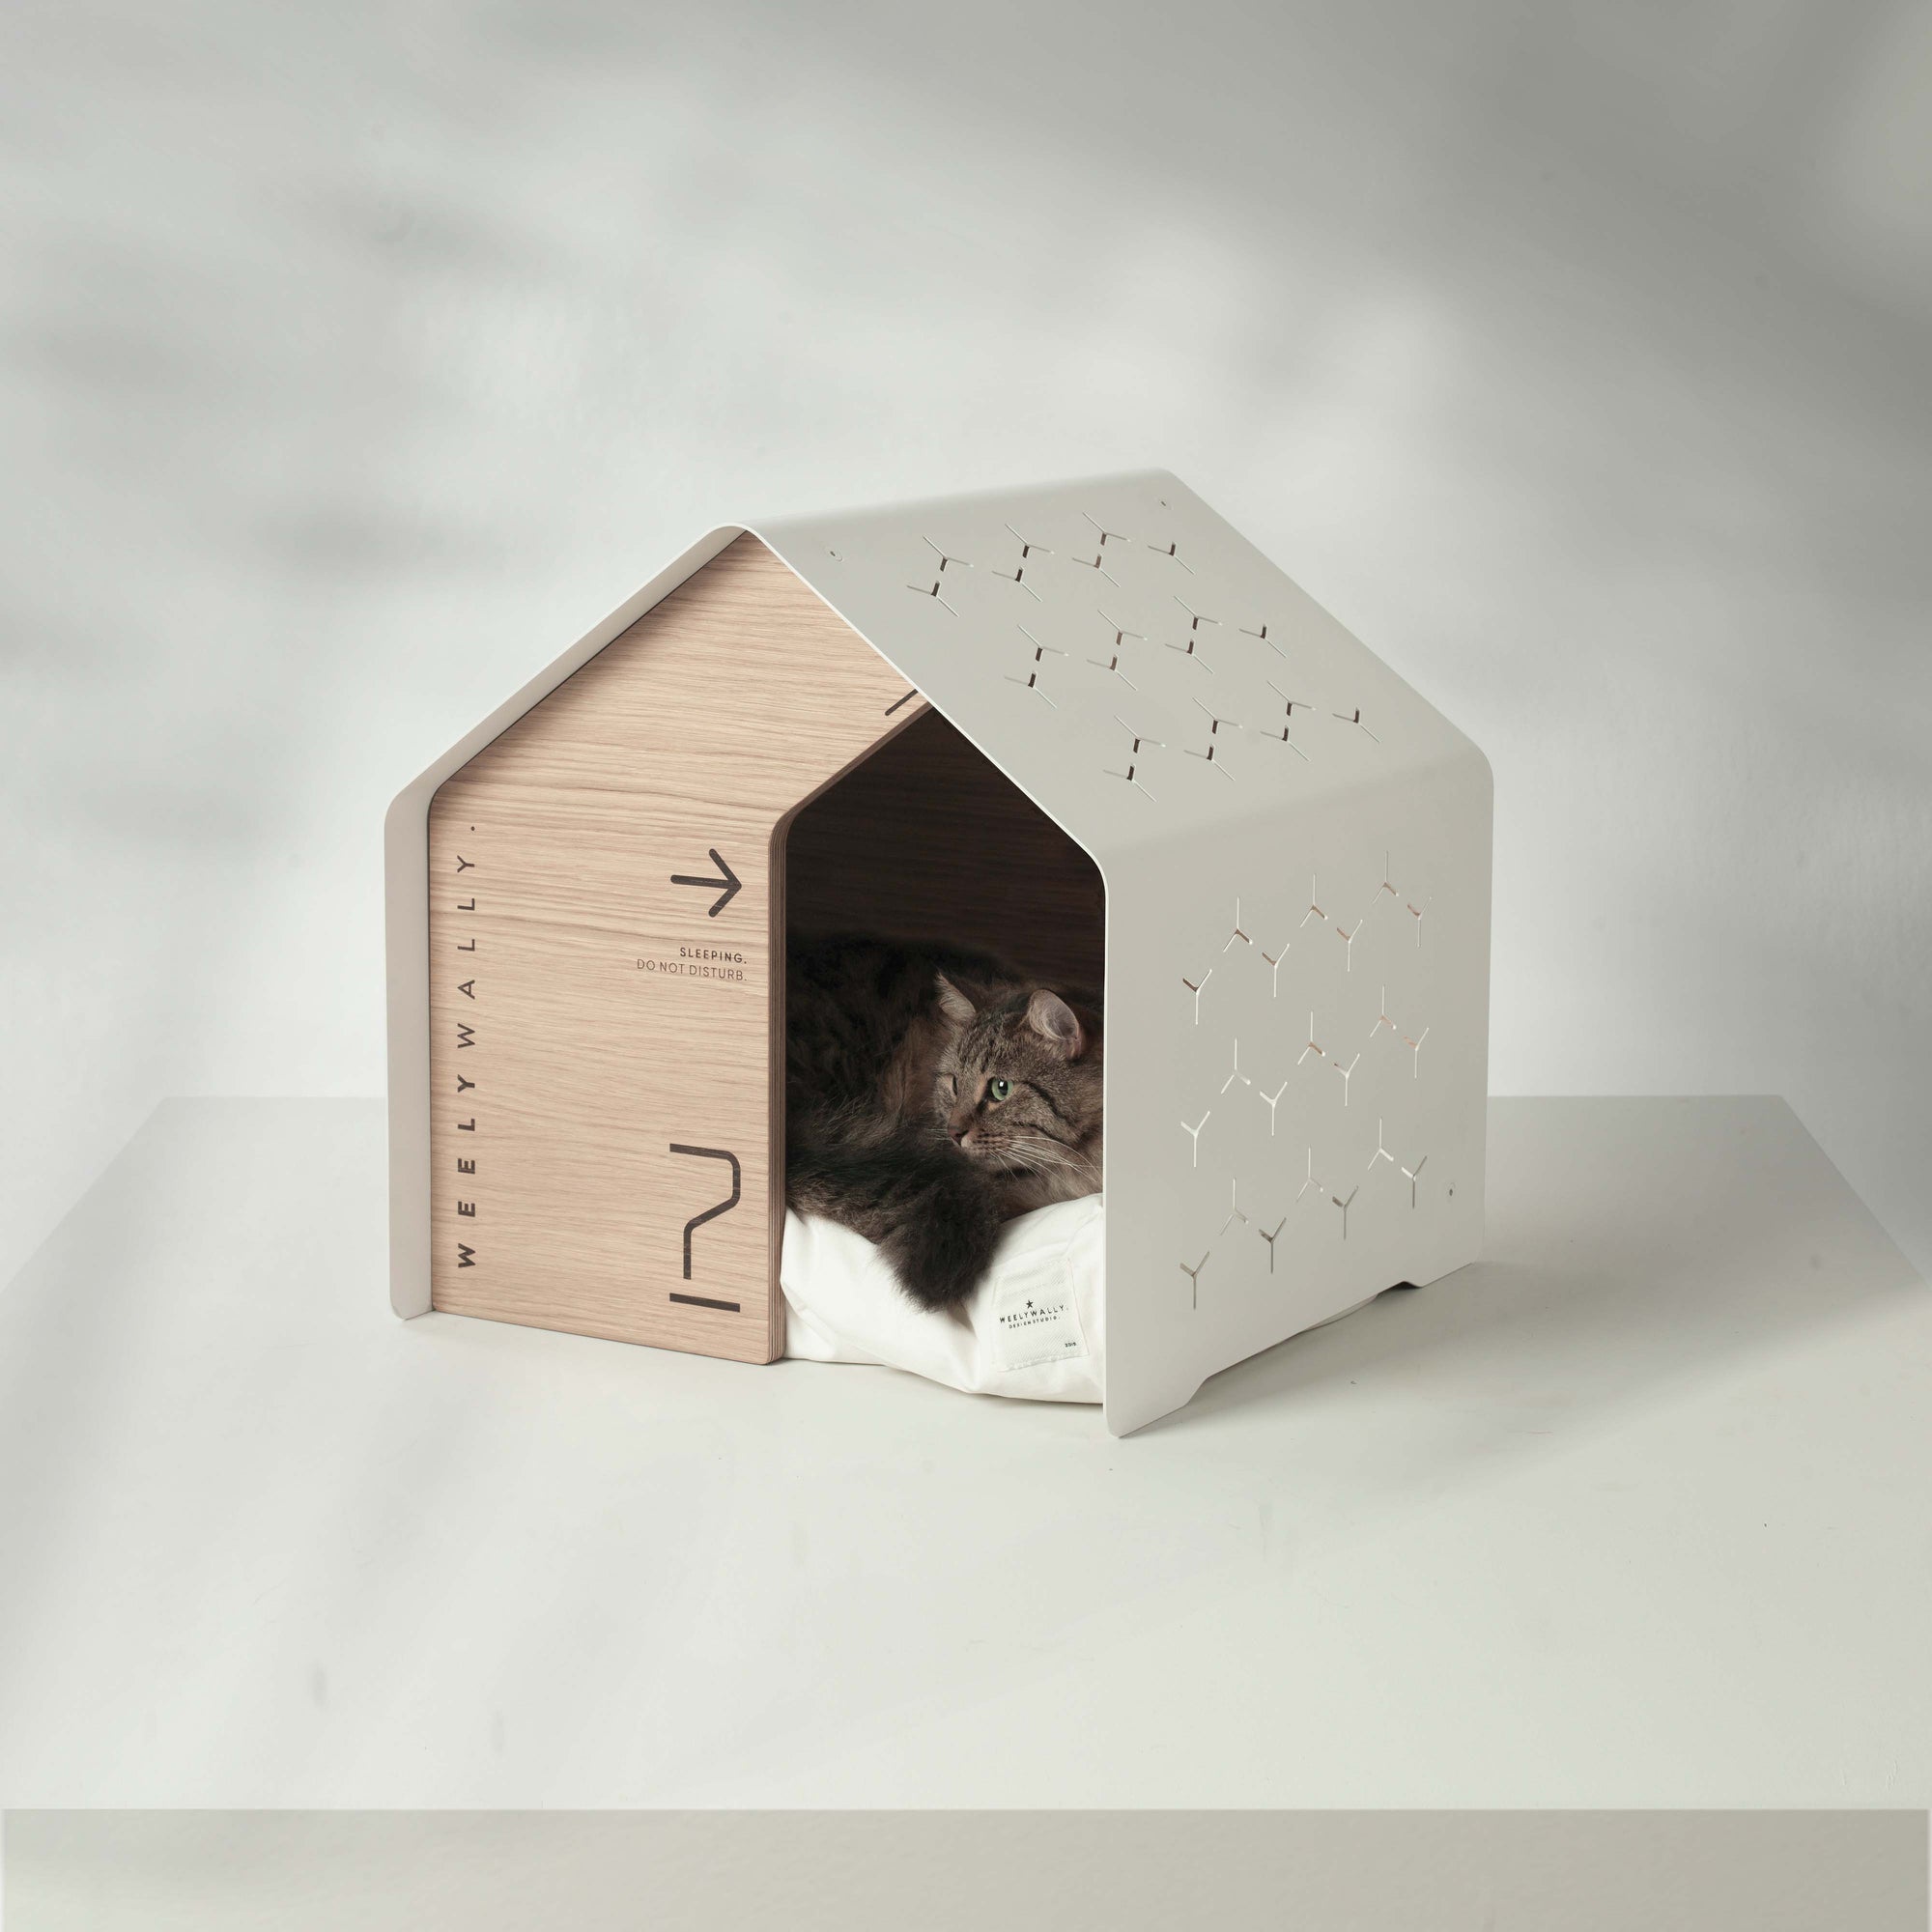 Dog or Cat house bed it enhance their lifestyle & make your home pet-friendly